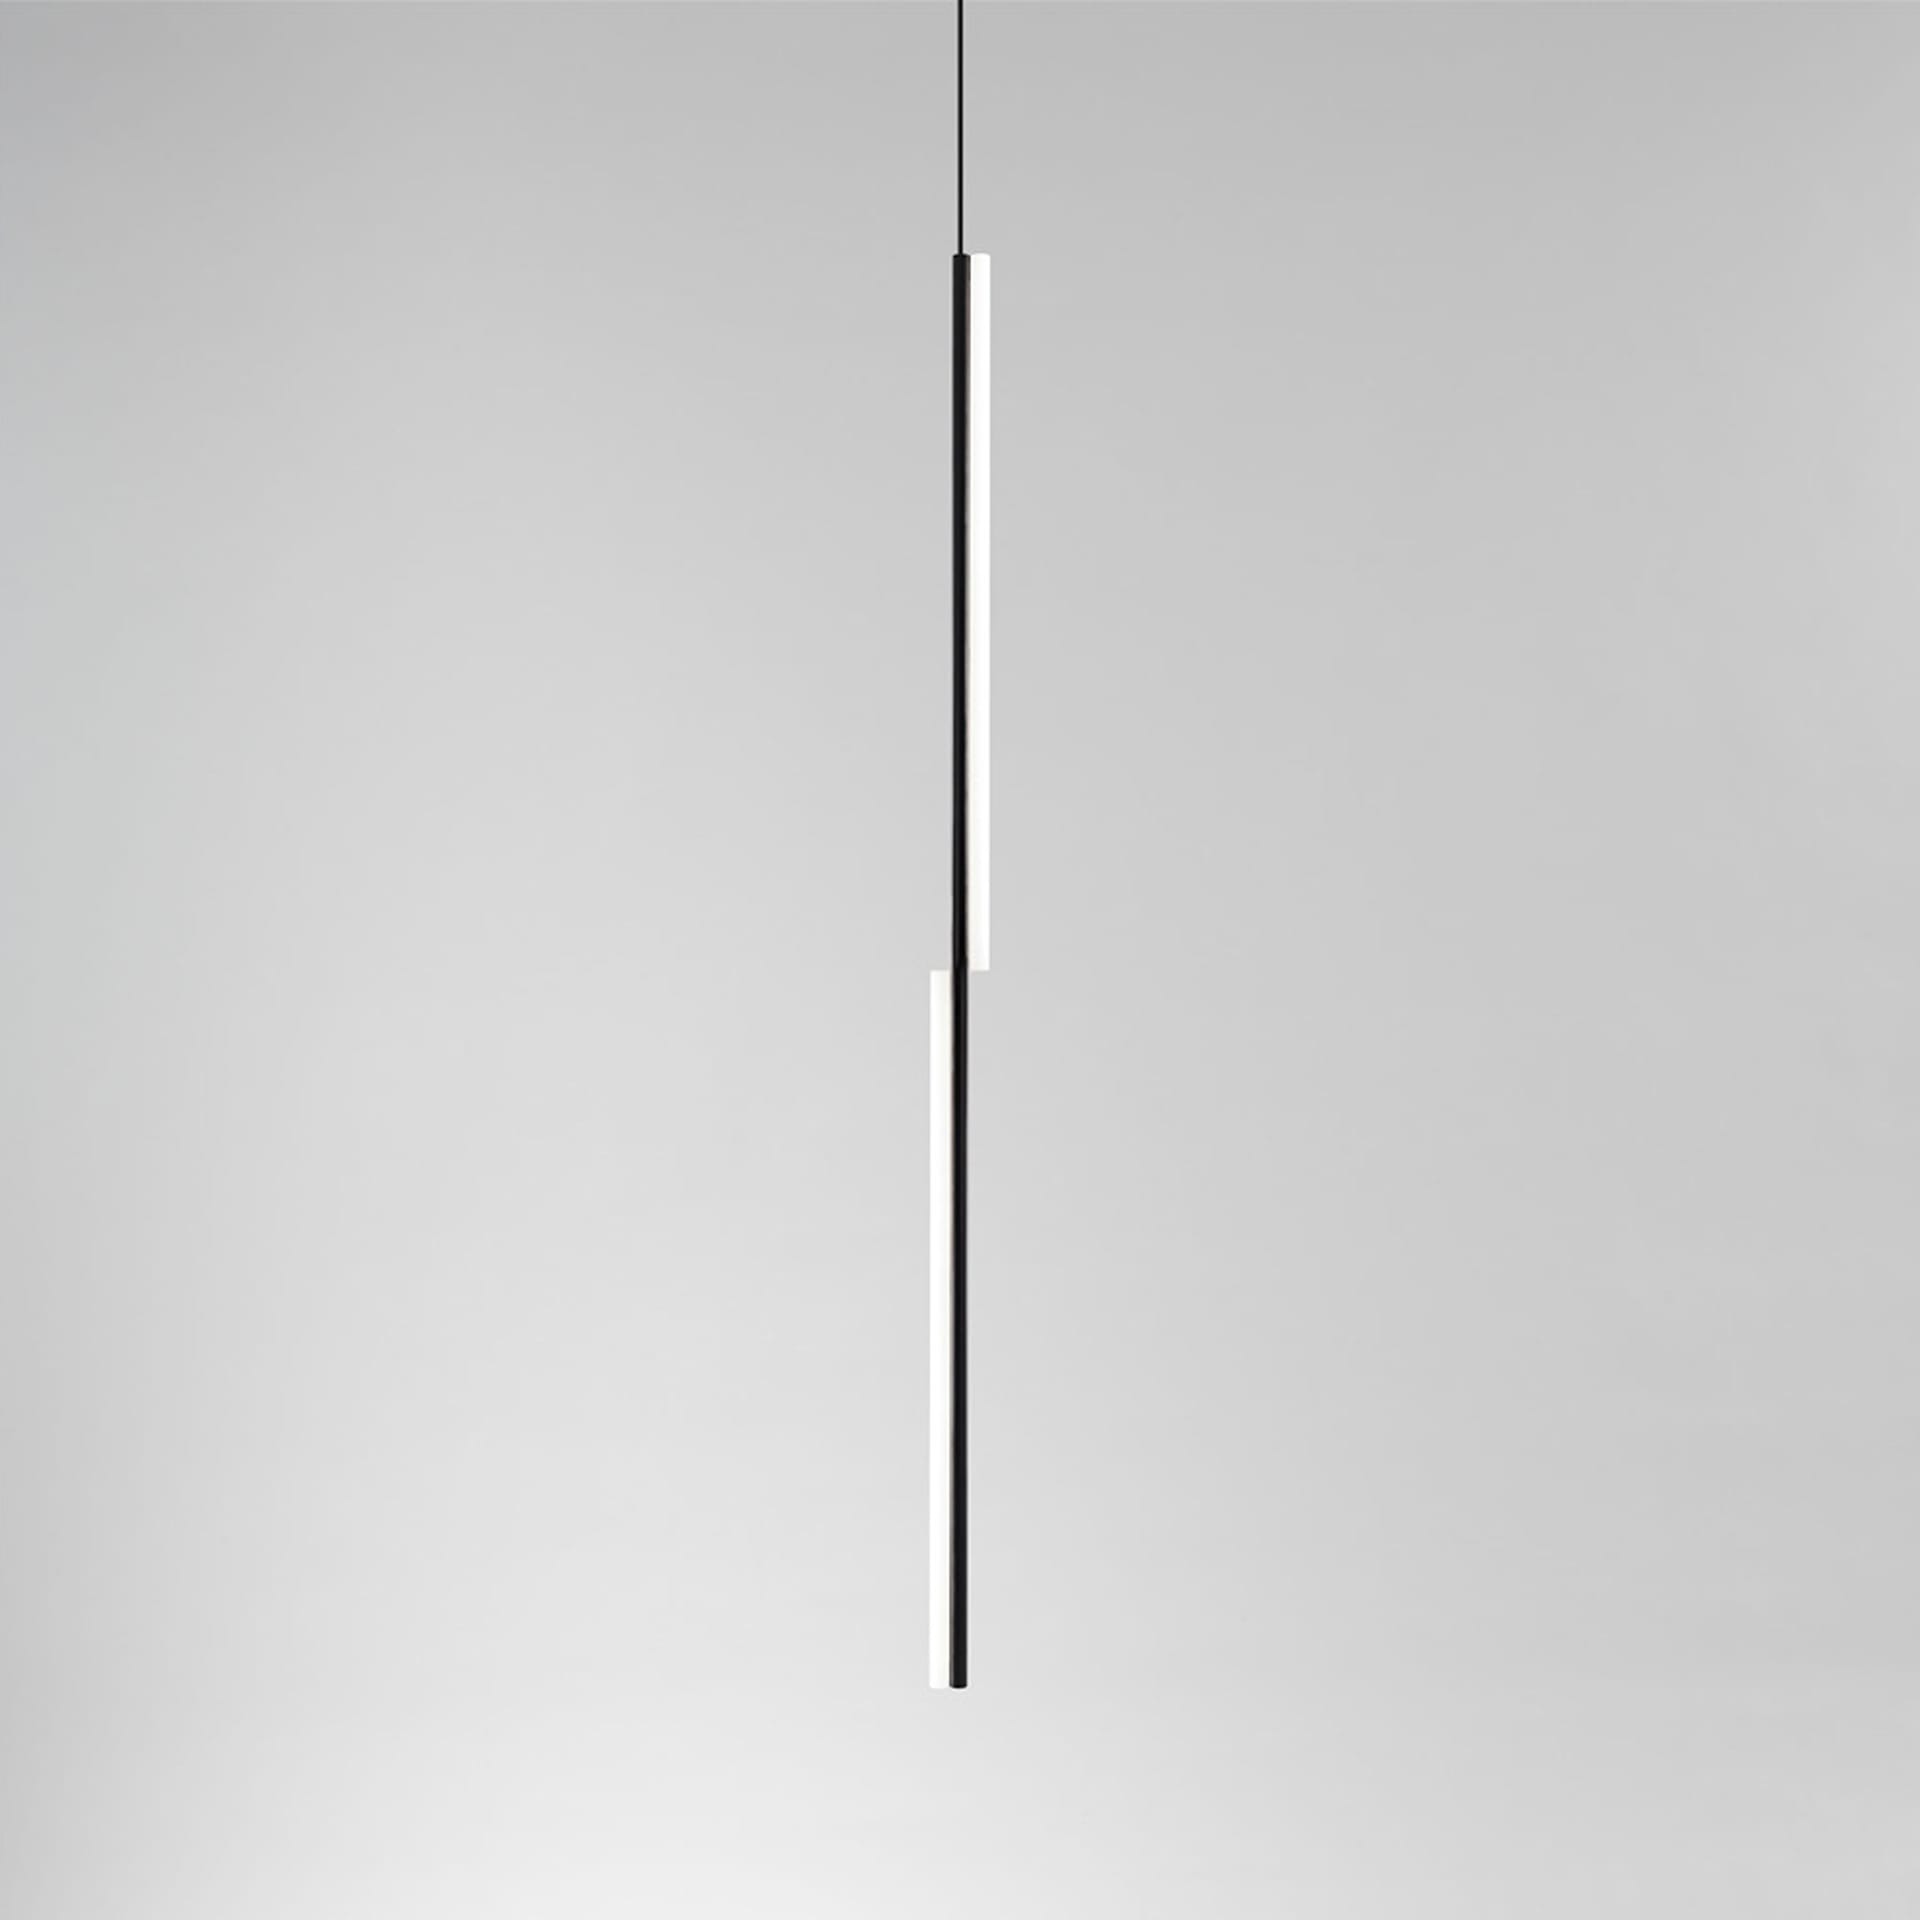 One Well Known Sequence Pendant 0101 - Michael Anastassiades - Michael Anastassiades - NO GA